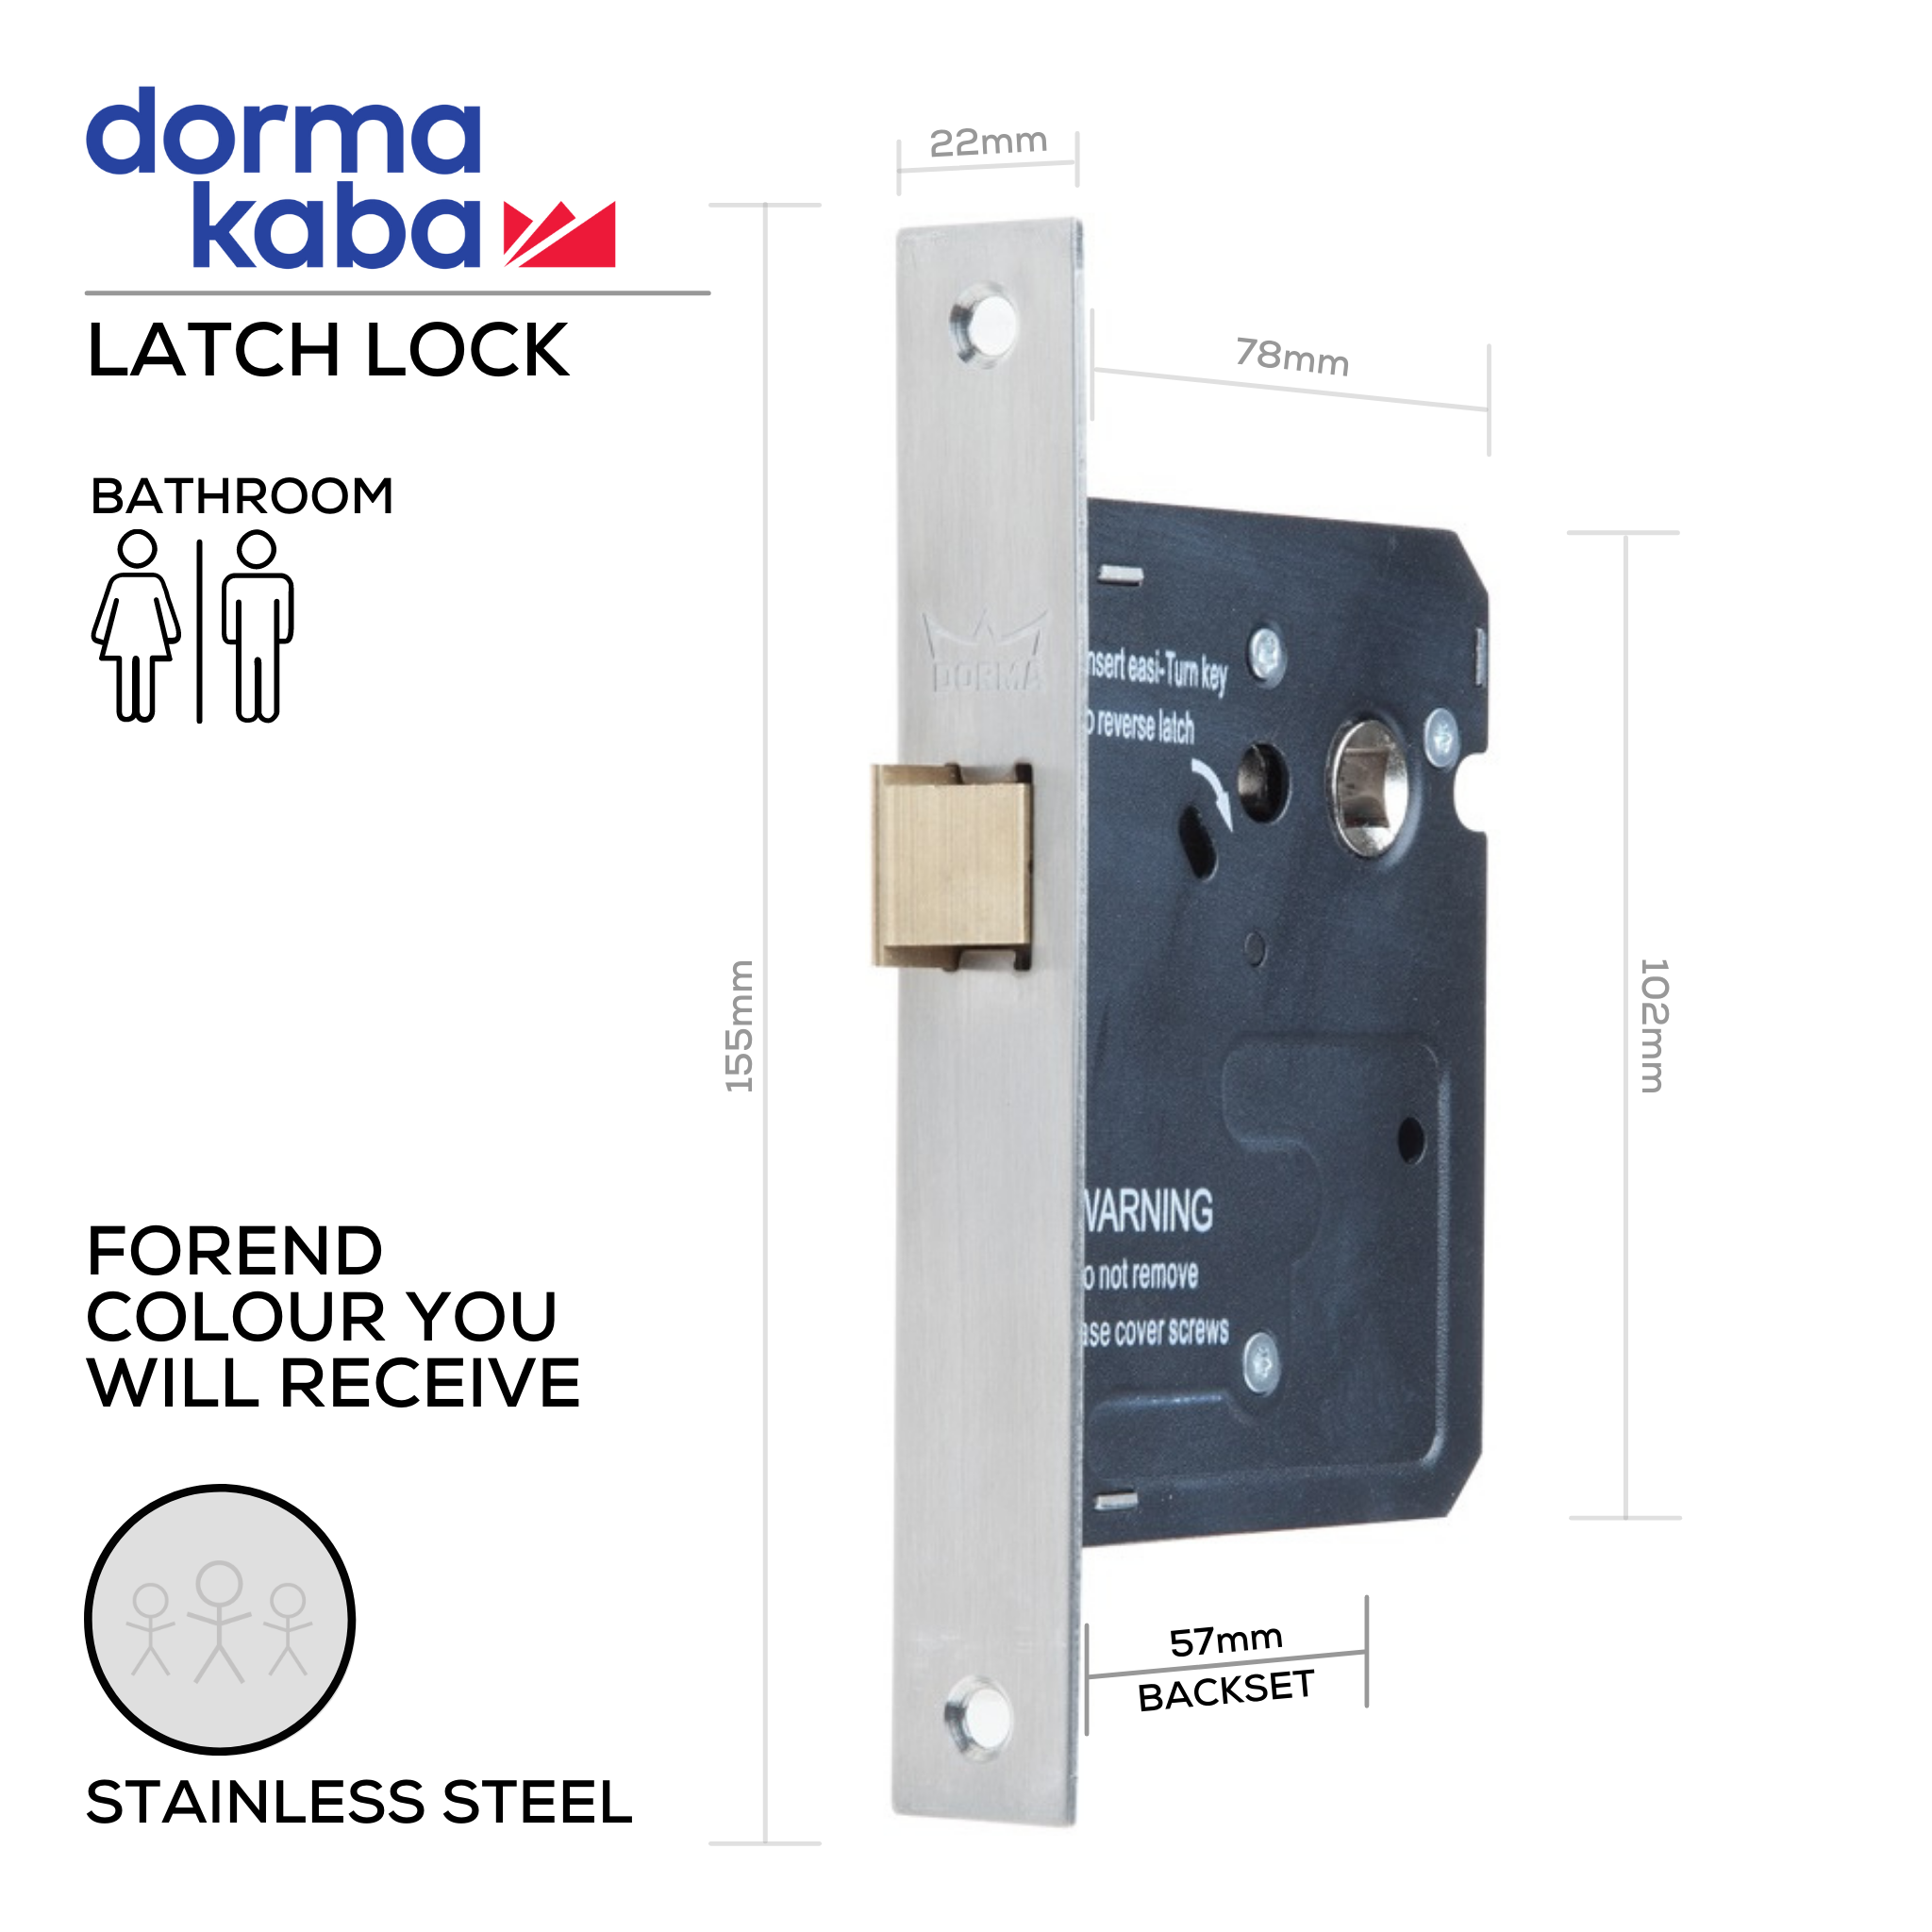 D031L Stainless Steel, Bathroom, Latch Lock, WC Thumbturn Hardware, Excludes Thumbturn, 57mm (Backset), Stainless Steel, DORMAKABA